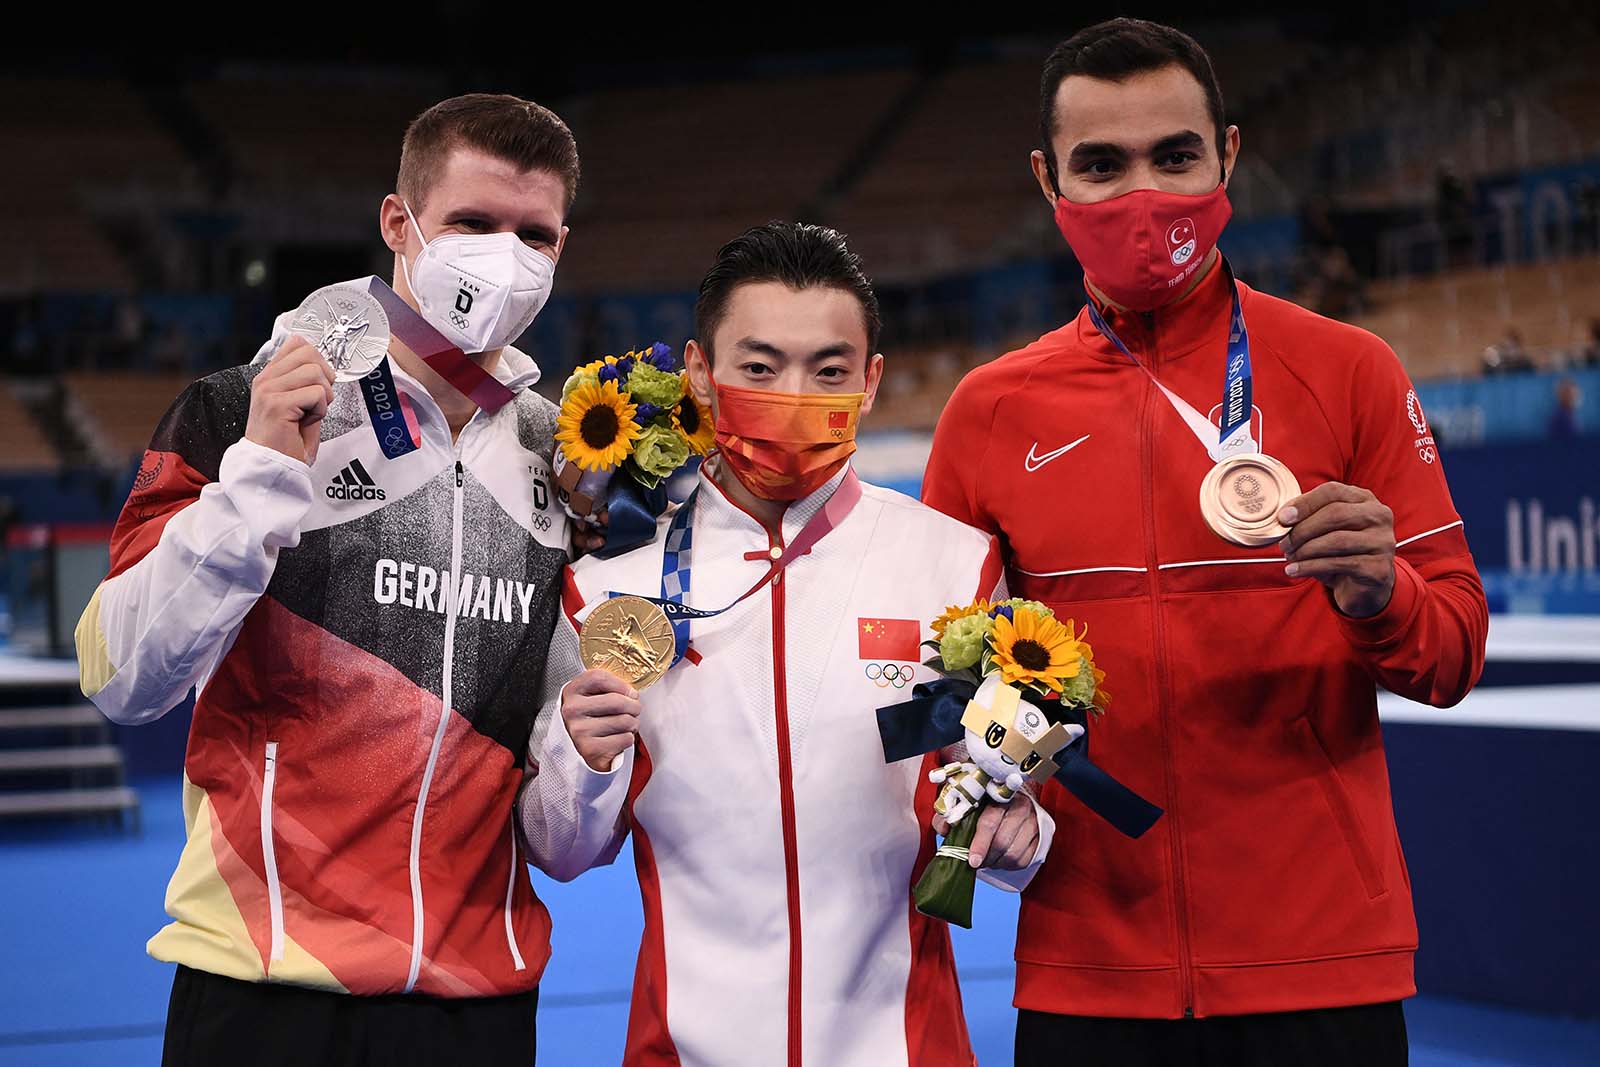 From left: Silver medalist Lukas Dauser of Germany, gold medalist Zou Jingyuan of China, and bronze medalist Ferhat Arican of Turkey pose during the medal ceremony of the artistic gymnastics men's horizontal bar on August 3.